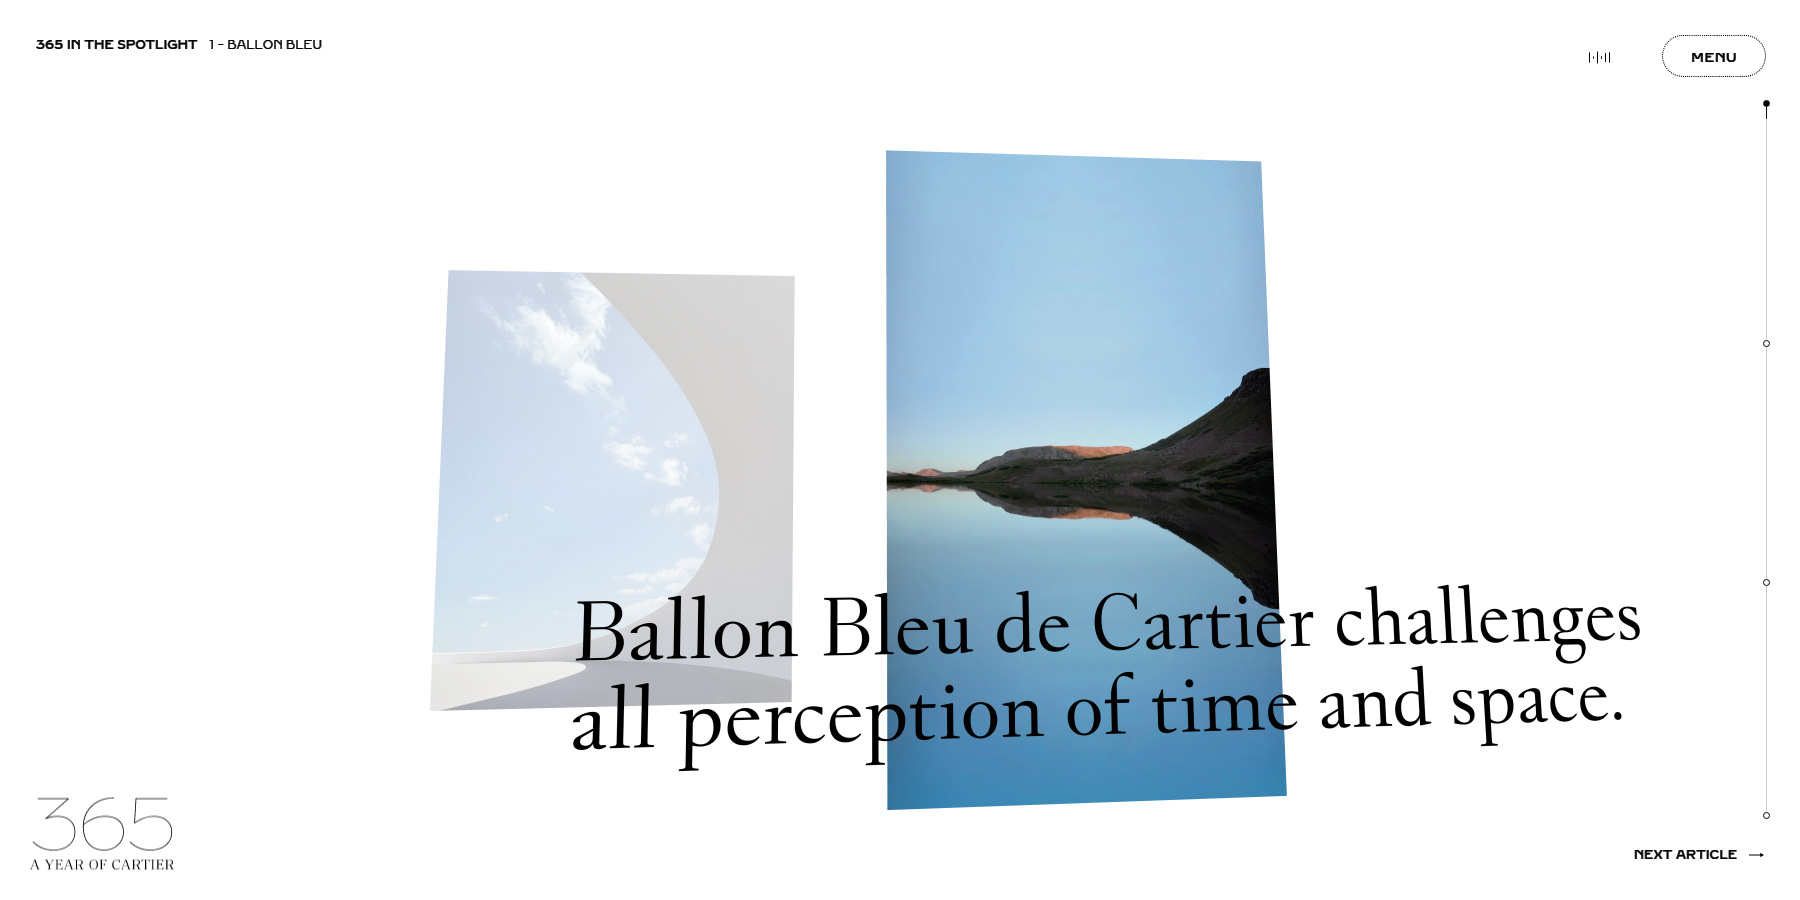 365, A Year of Cartier - Website of the Day